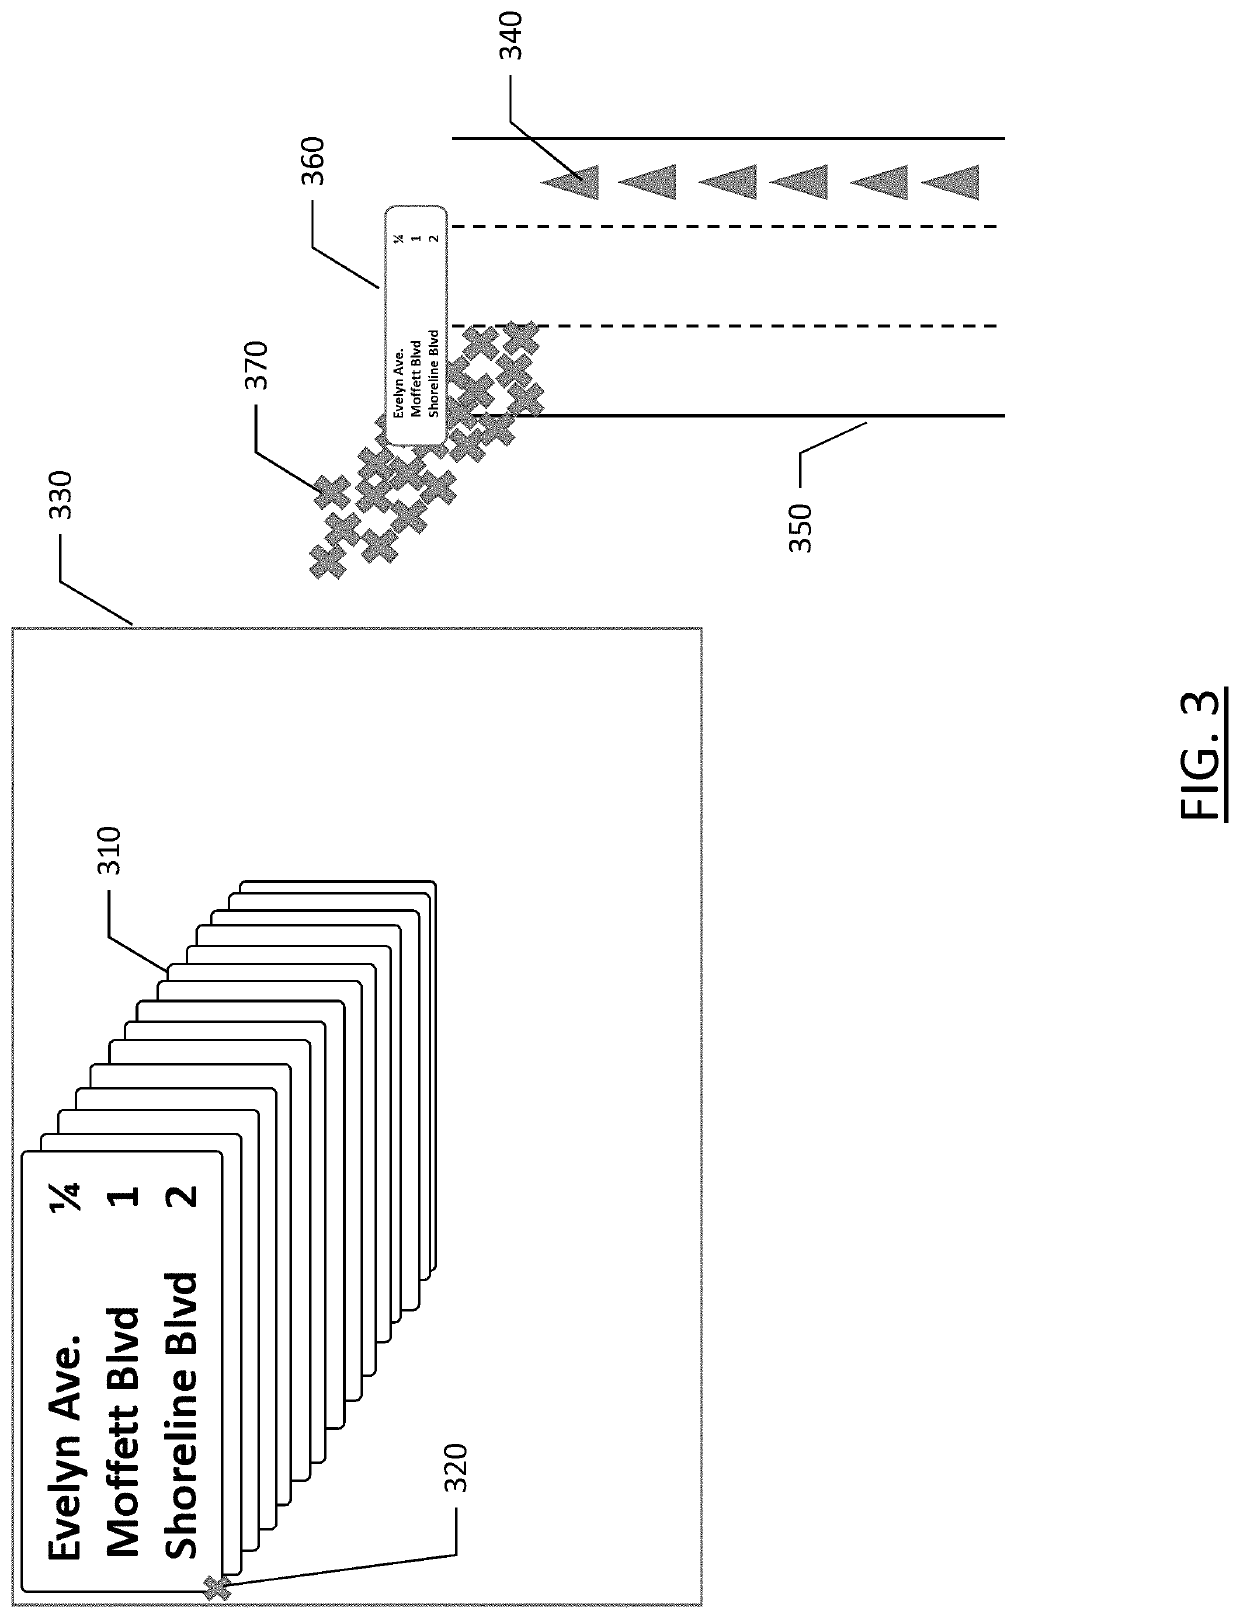 Method and apparatus for iteratively establishing object position